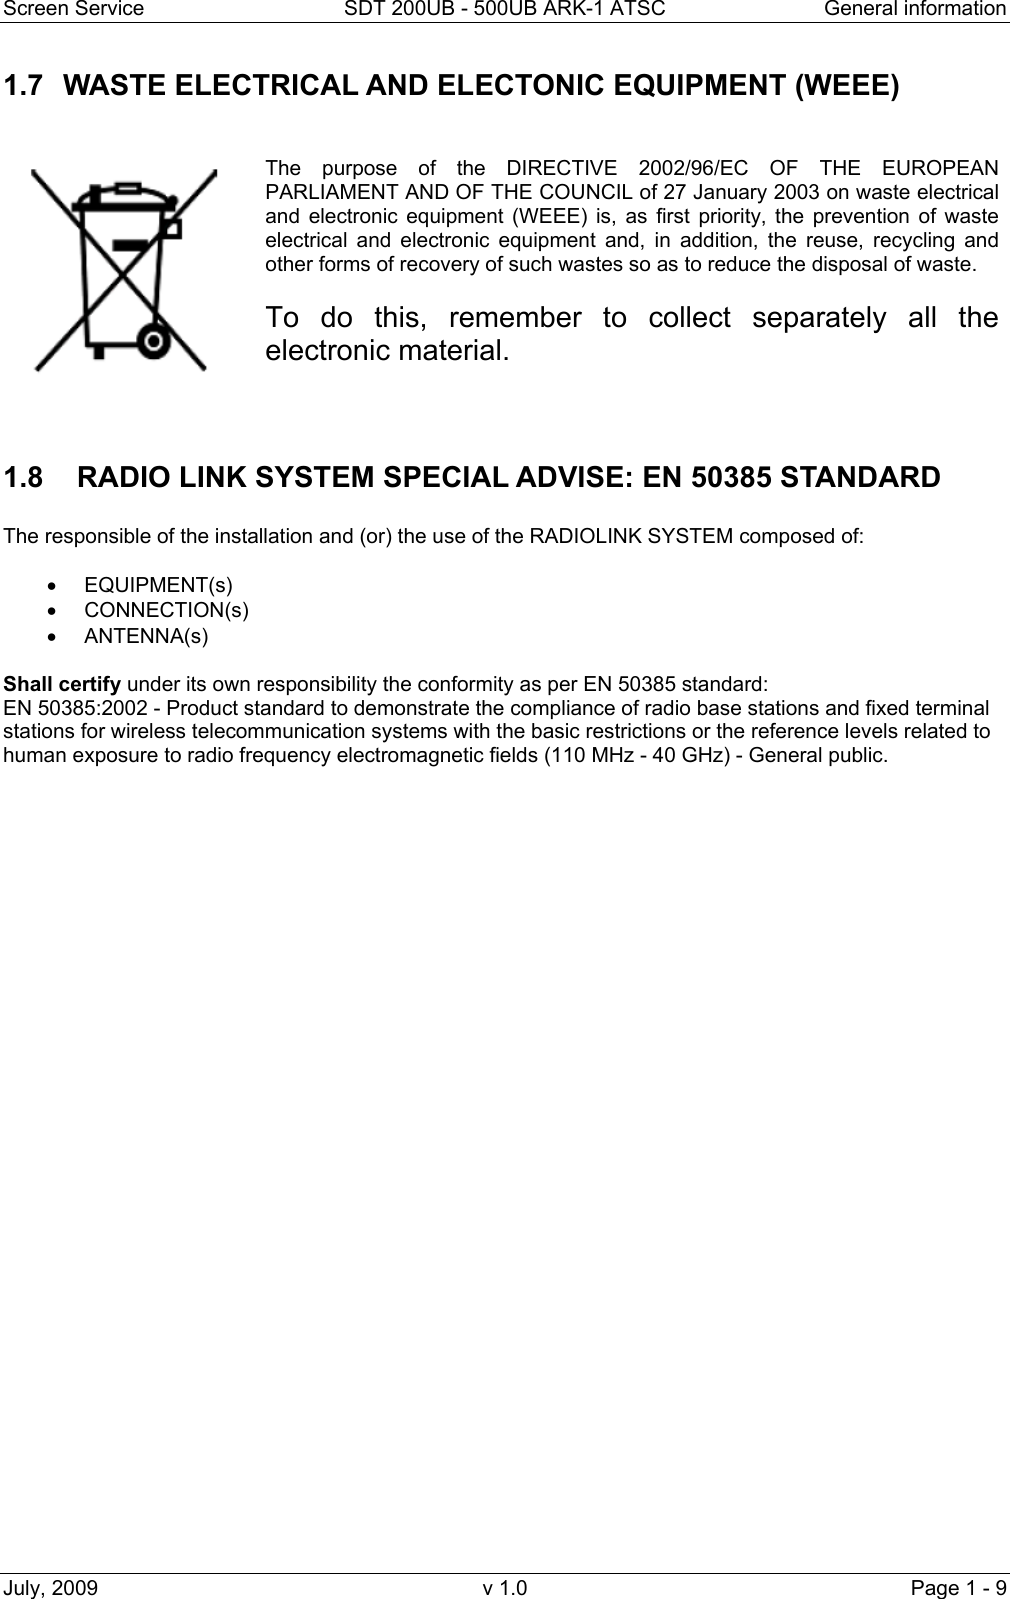 Screen Service  SDT 200UB - 500UB ARK-1 ATSC  General information July, 2009  v 1.0  Page 1 - 9 1.7  WASTE ELECTRICAL AND ELECTONIC EQUIPMENT (WEEE)     The purpose of the DIRECTIVE 2002/96/EC OF THE EUROPEAN PARLIAMENT AND OF THE COUNCIL of 27 January 2003 on waste electrical and electronic equipment (WEEE) is, as first priority, the prevention of waste electrical and electronic equipment and, in addition, the reuse, recycling and other forms of recovery of such wastes so as to reduce the disposal of waste.   To do this, remember to collect separately all the electronic material.   1.8    RADIO LINK SYSTEM SPECIAL ADVISE: EN 50385 STANDARD  The responsible of the installation and (or) the use of the RADIOLINK SYSTEM composed of:   • EQUIPMENT(s) • CONNECTION(s) • ANTENNA(s)  Shall certify under its own responsibility the conformity as per EN 50385 standard:                                                              EN 50385:2002 - Product standard to demonstrate the compliance of radio base stations and fixed terminal stations for wireless telecommunication systems with the basic restrictions or the reference levels related to human exposure to radio frequency electromagnetic fields (110 MHz - 40 GHz) - General public. 